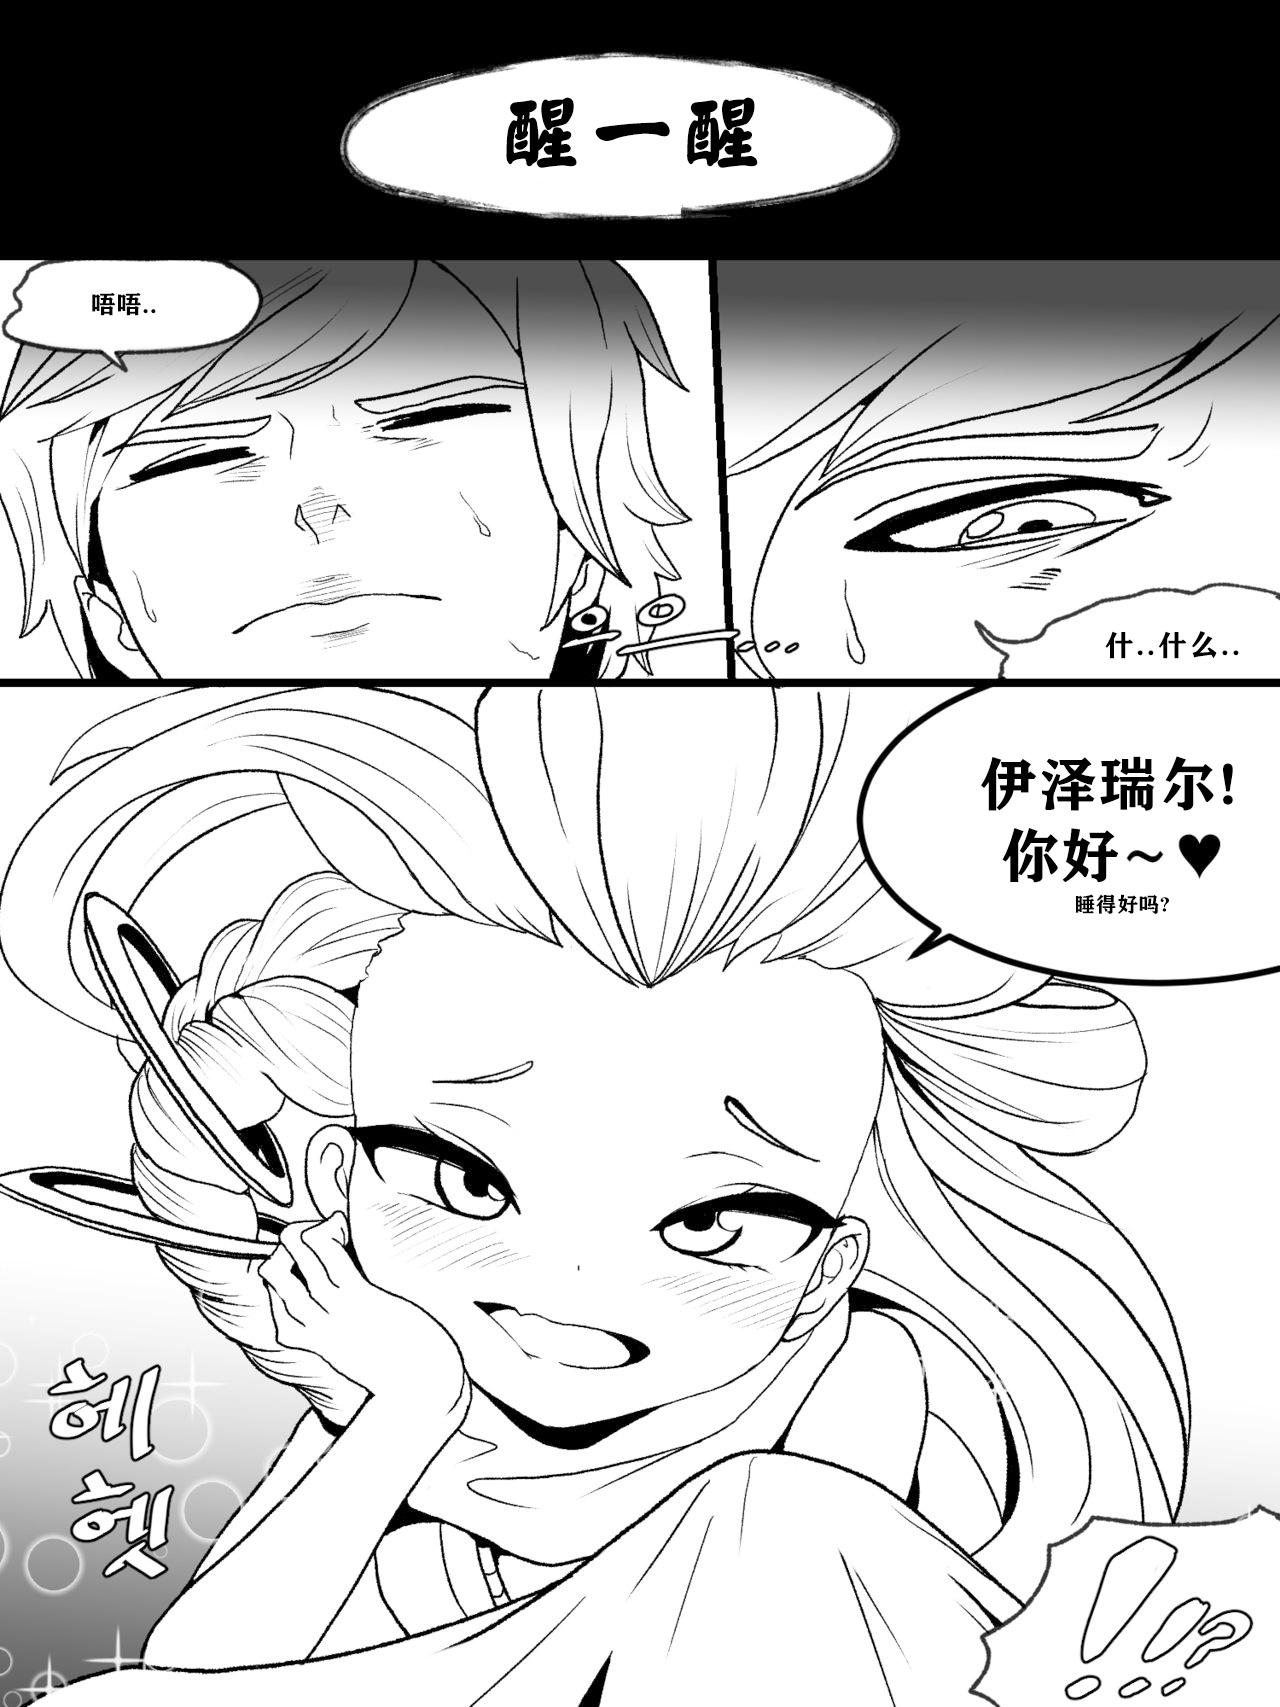 Nut The reality in the starlight | 星光中的真实 - League of legends Canadian - Page 4